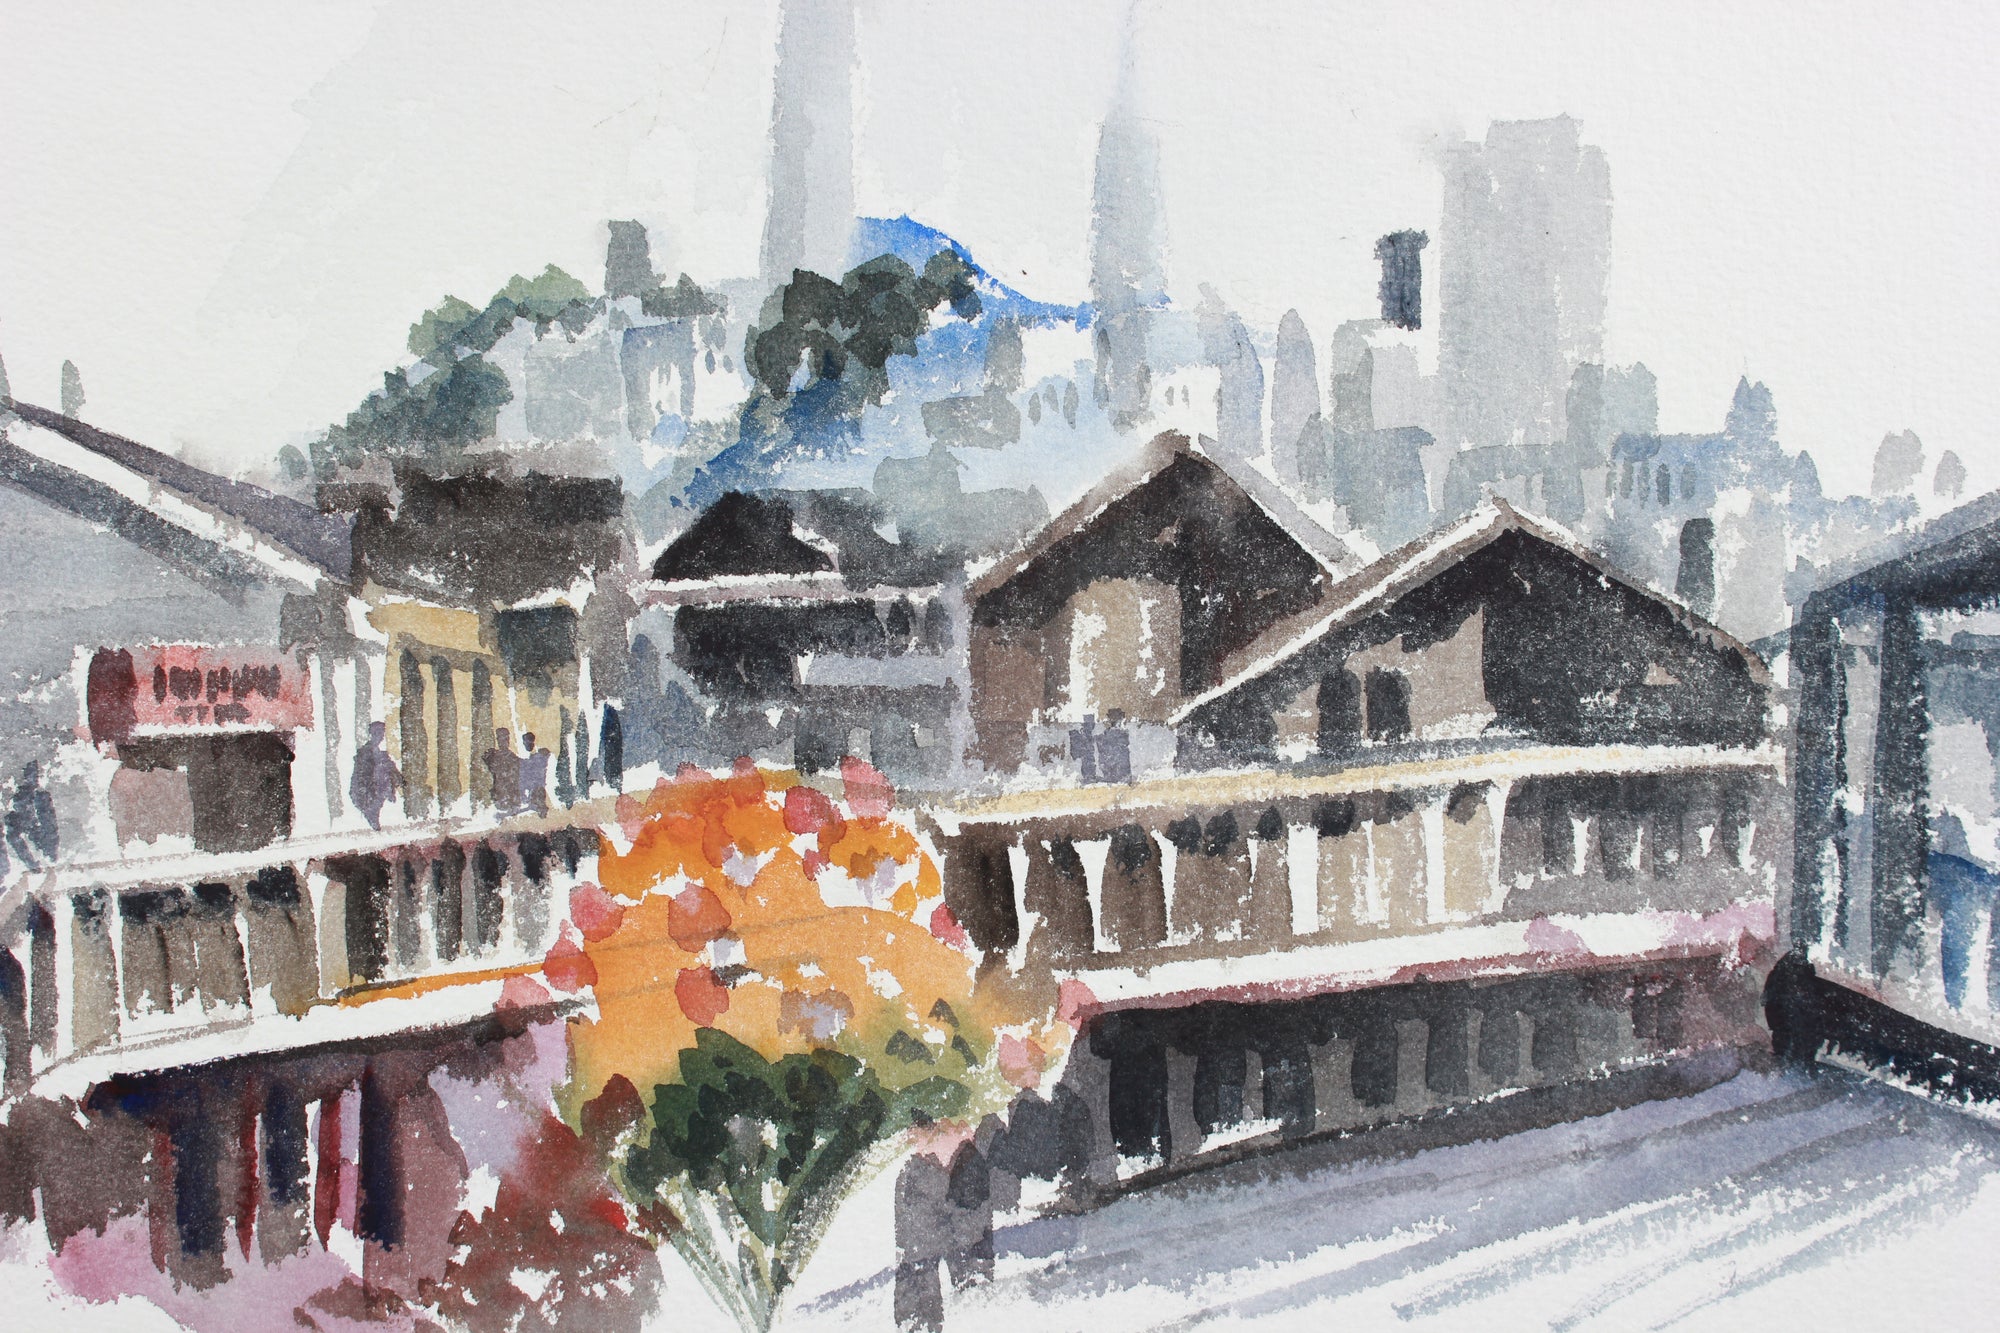 Balcony Cityscape View <br>Mid to Late 20th Century Watercolor <br><br>#A7775